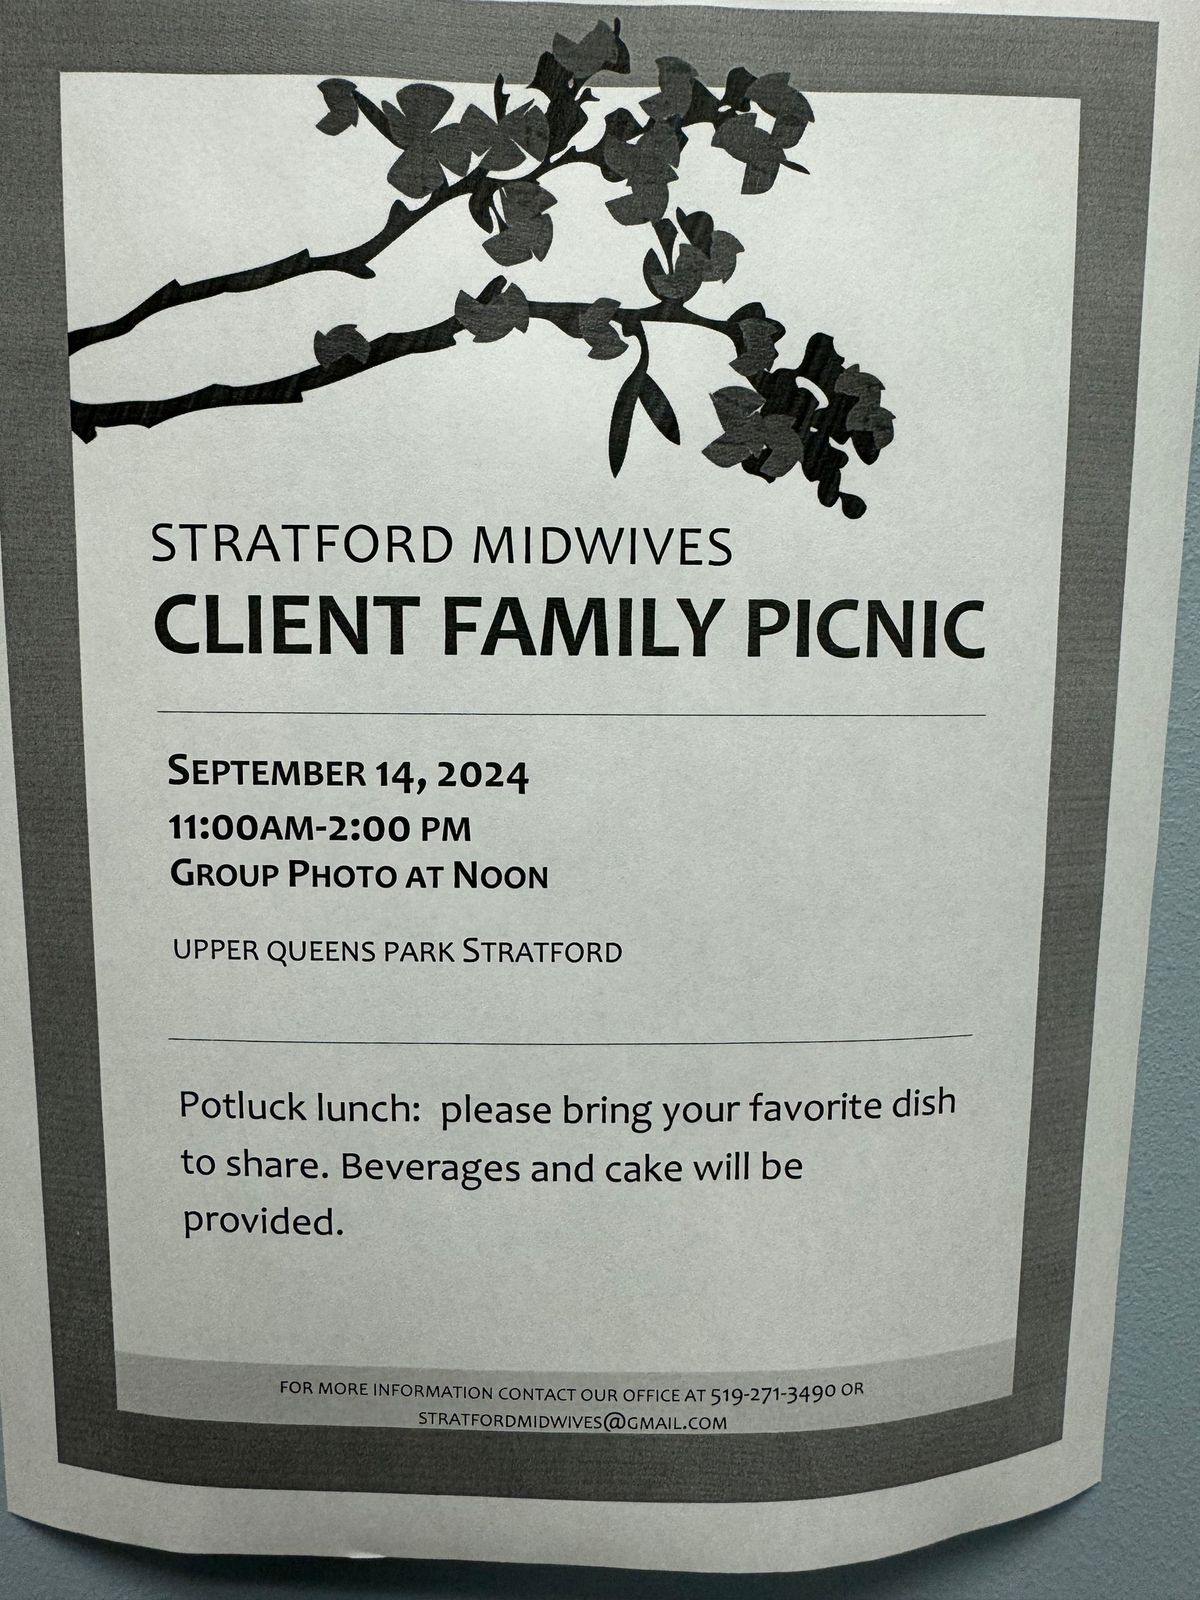 Stratford Midwives Client Family Picnic